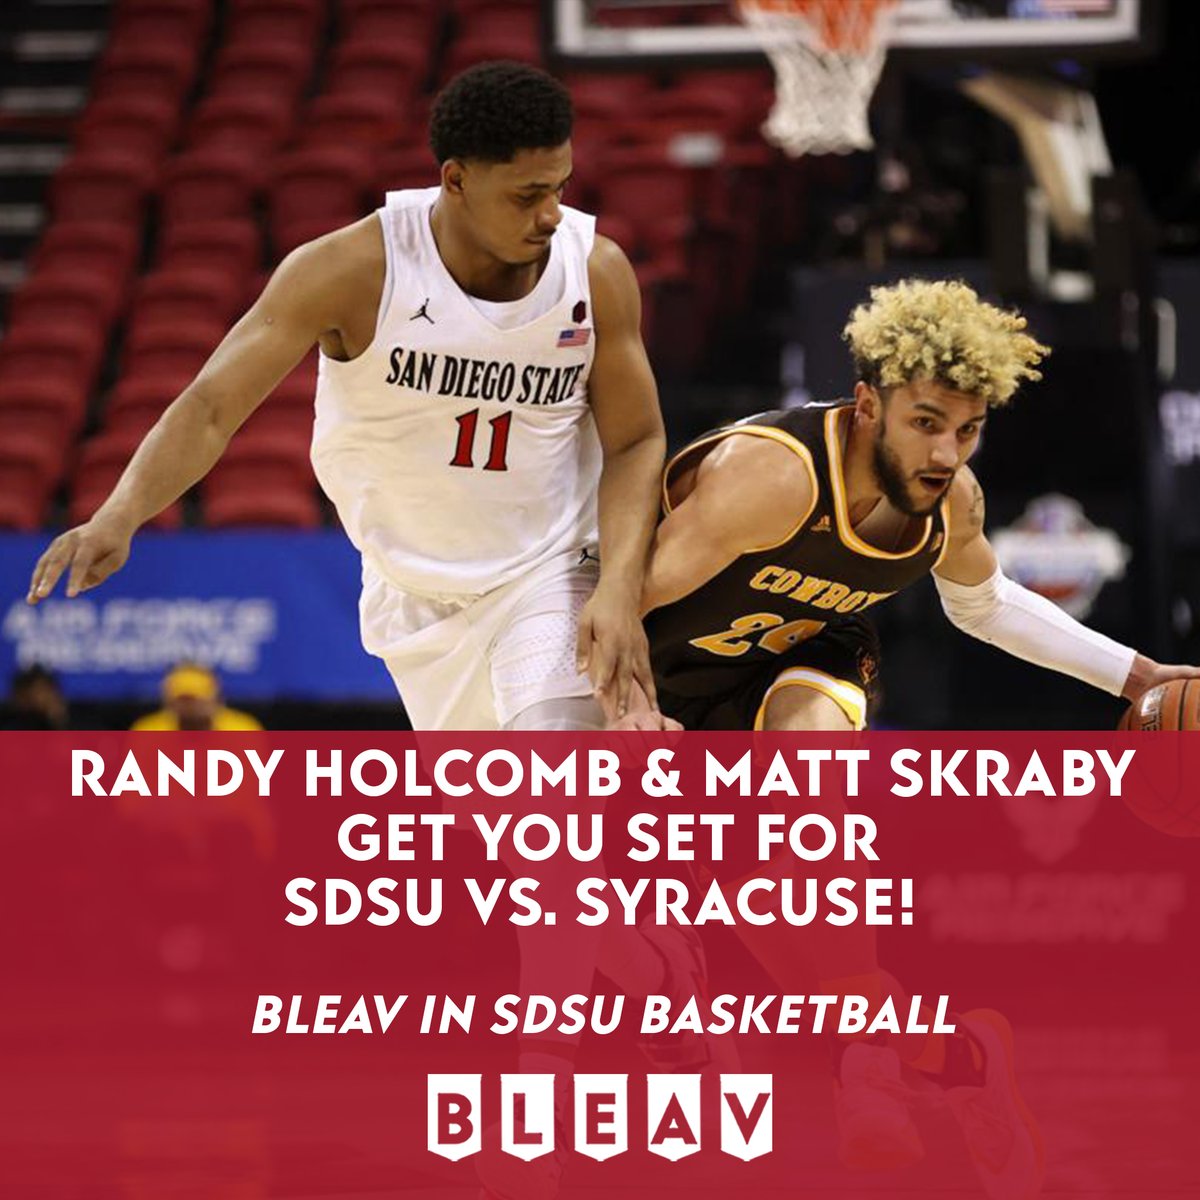 The Aztecs are dancing! Catch @MattSkraby and Randy on an all-new Bleav in SDSU Basketball for their impressions of the opening round matchup with Syracuse. TAP IN: https://t.co/1h6vvqzeY5 https://t.co/lKwlI0zQrw